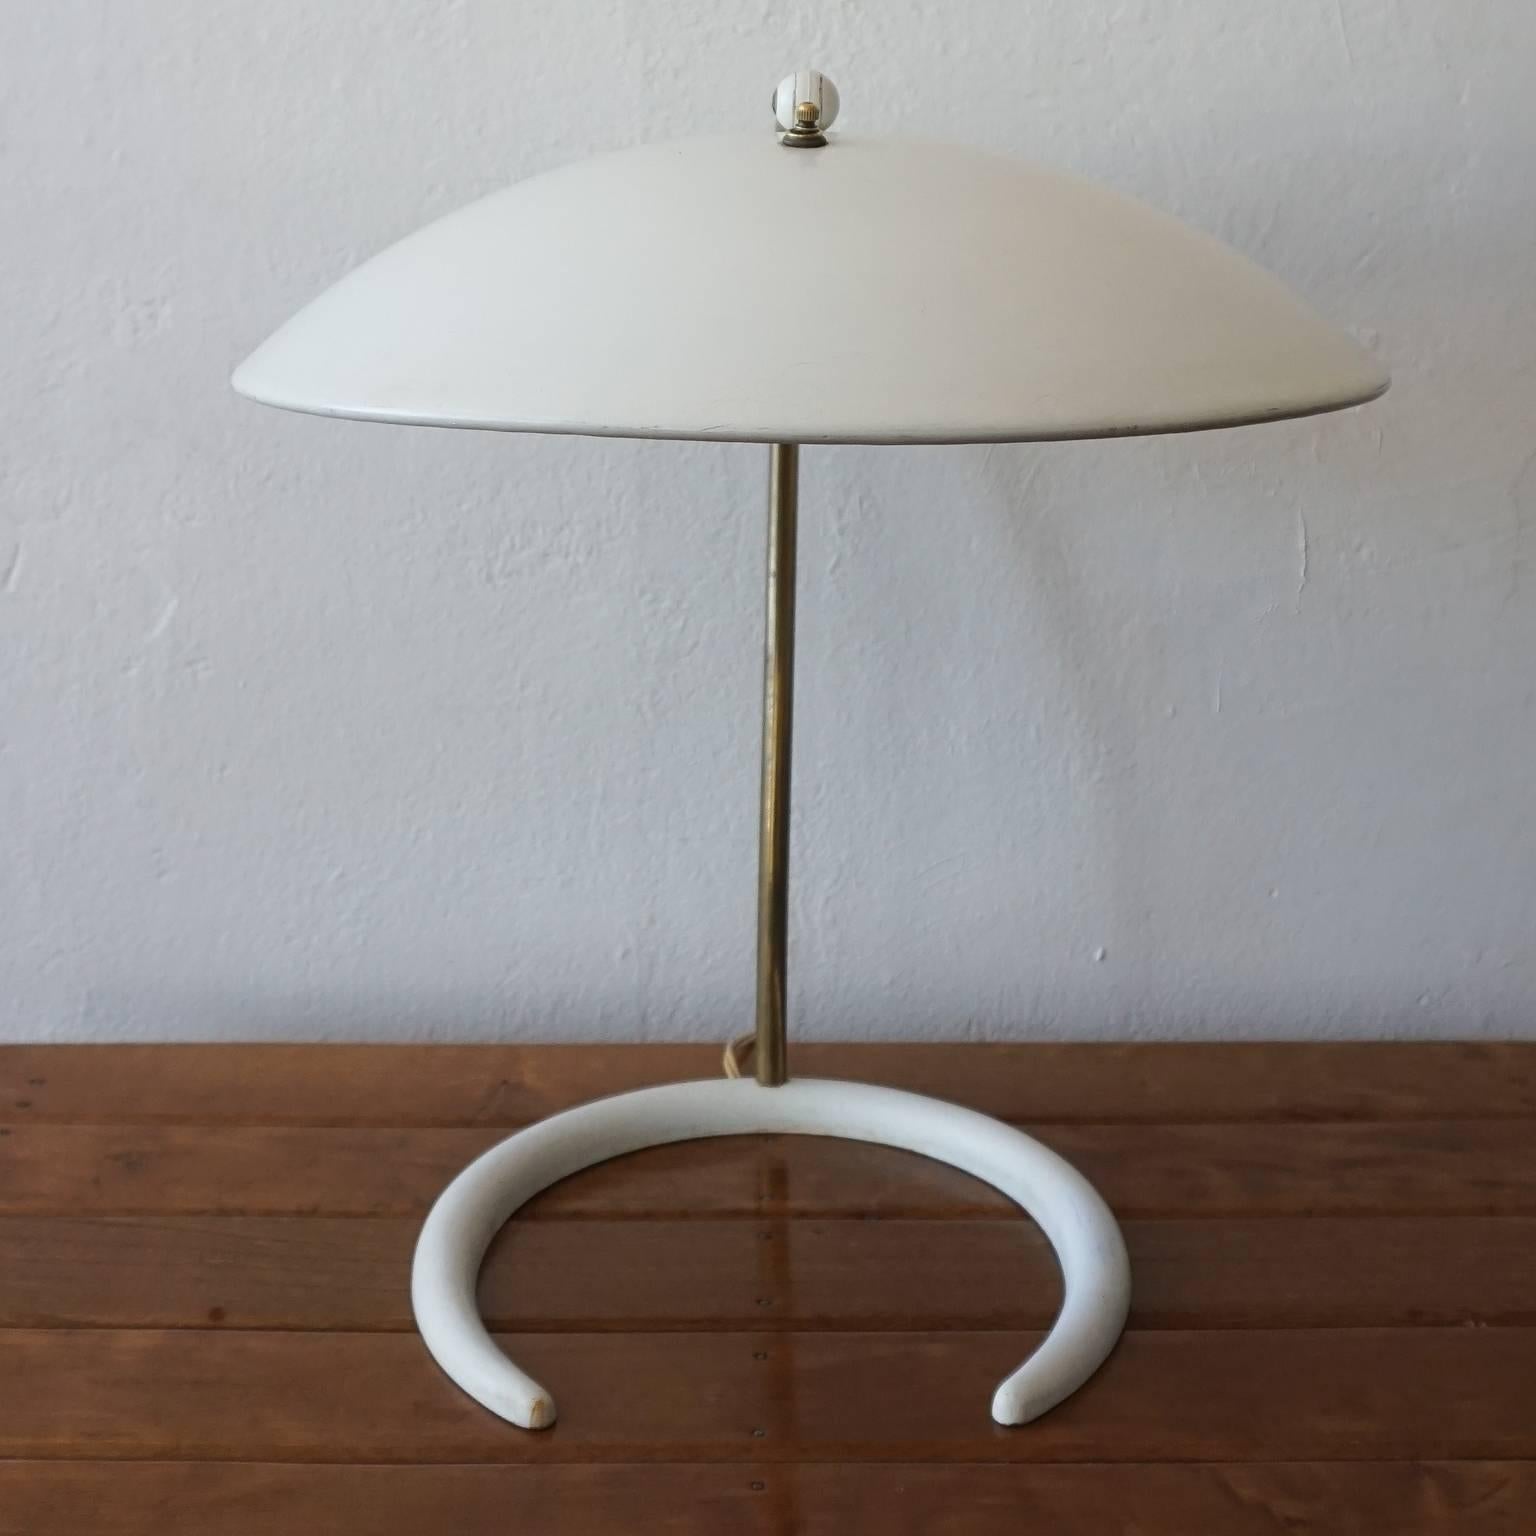 American 1950s Desk Lamp by Gerald Thurston